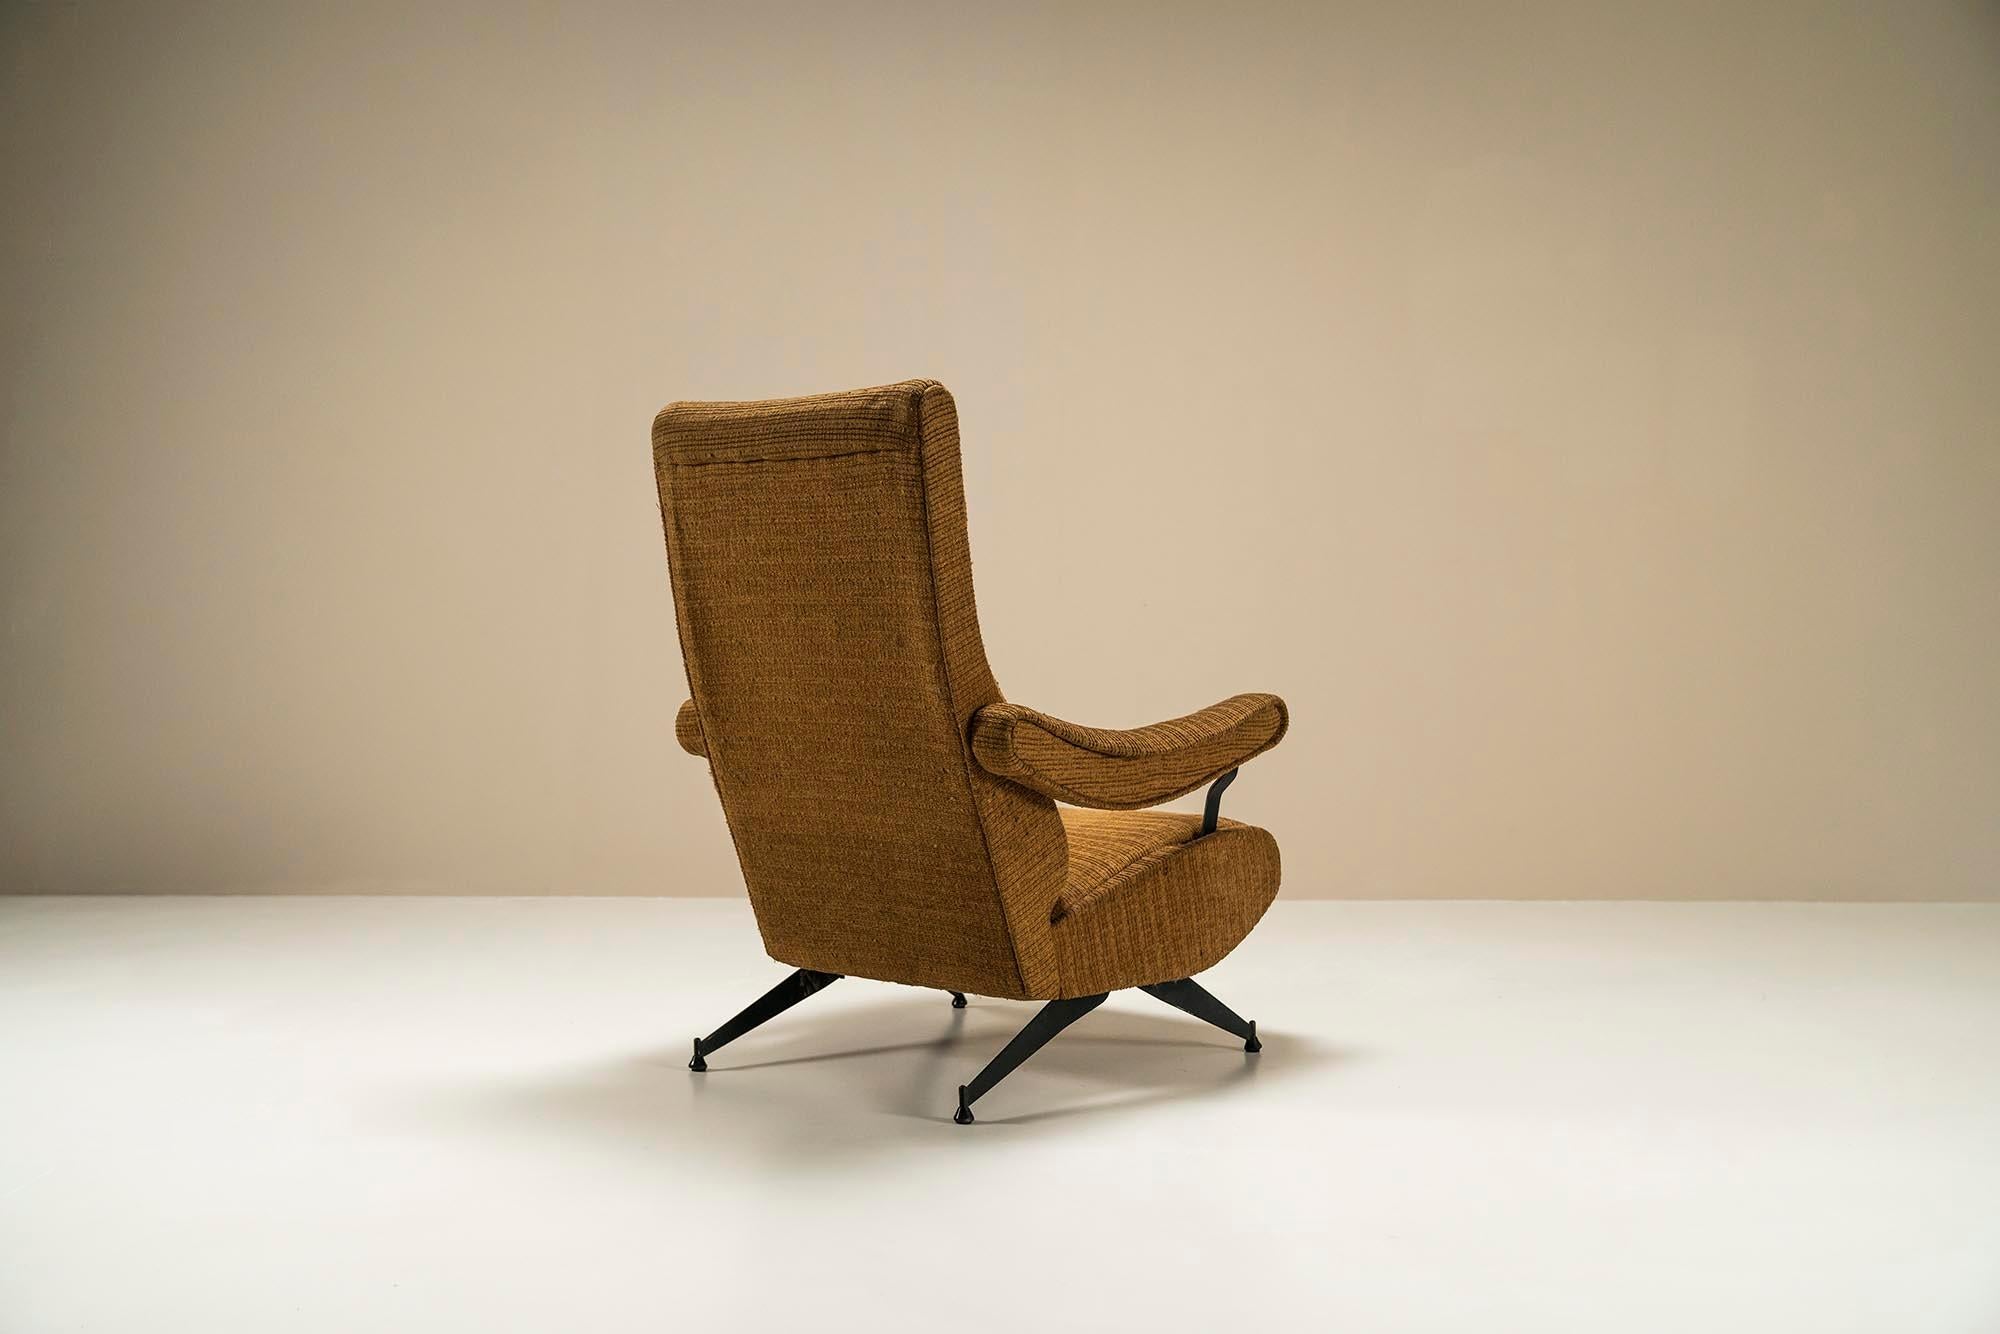 Mid-20th Century Reclining Armchair in Steel and Fabric by Nello Pini for Novarredo, Italy, 1959 For Sale